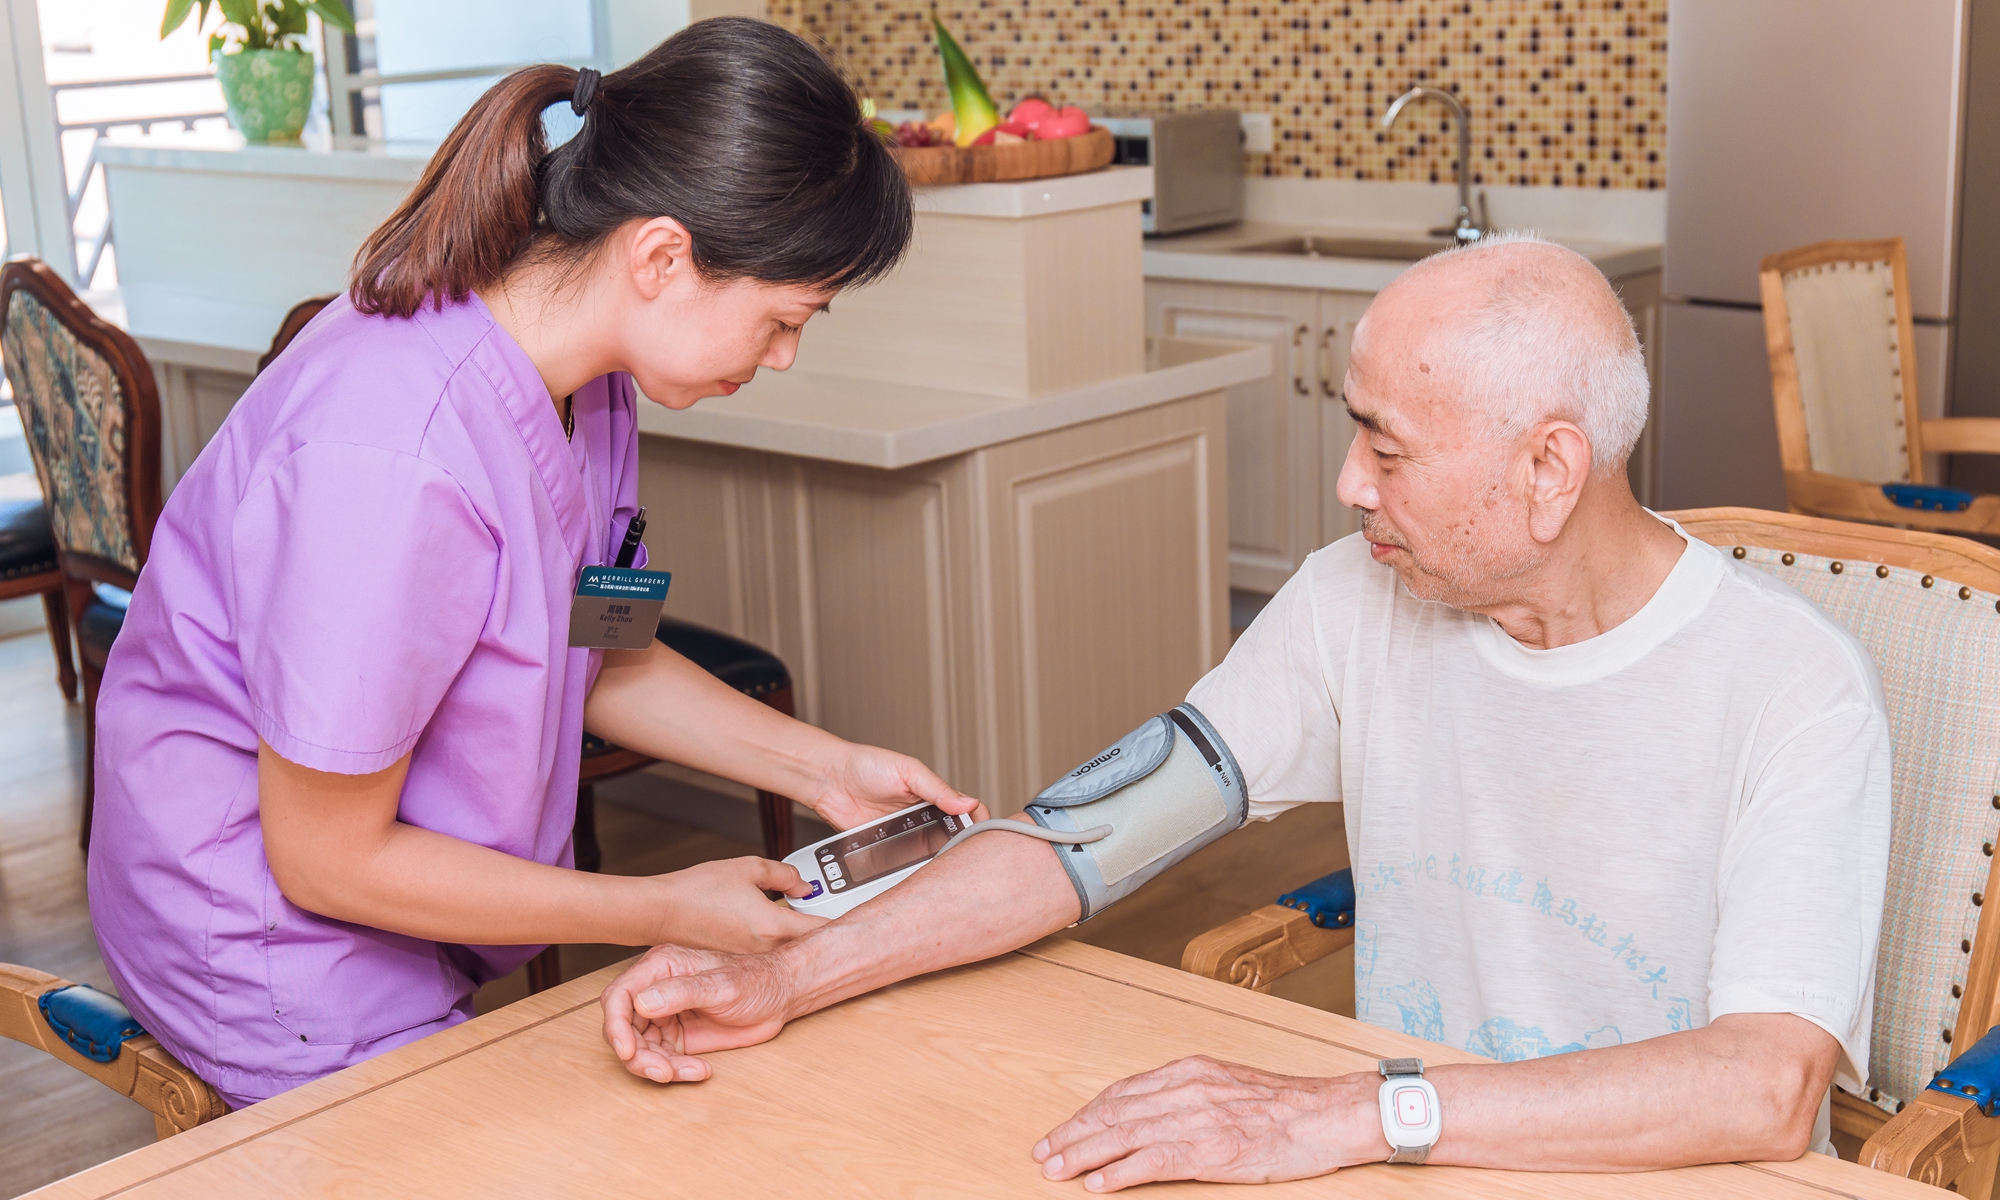 A nurse takes routine vital signs monitoring for a resident at Merrill Gardens' senior living community in Guilin, South China's Guangxi Zhuang Autonomous Region in 2019 summer. Photo: Courtesy of Merrill Gardens